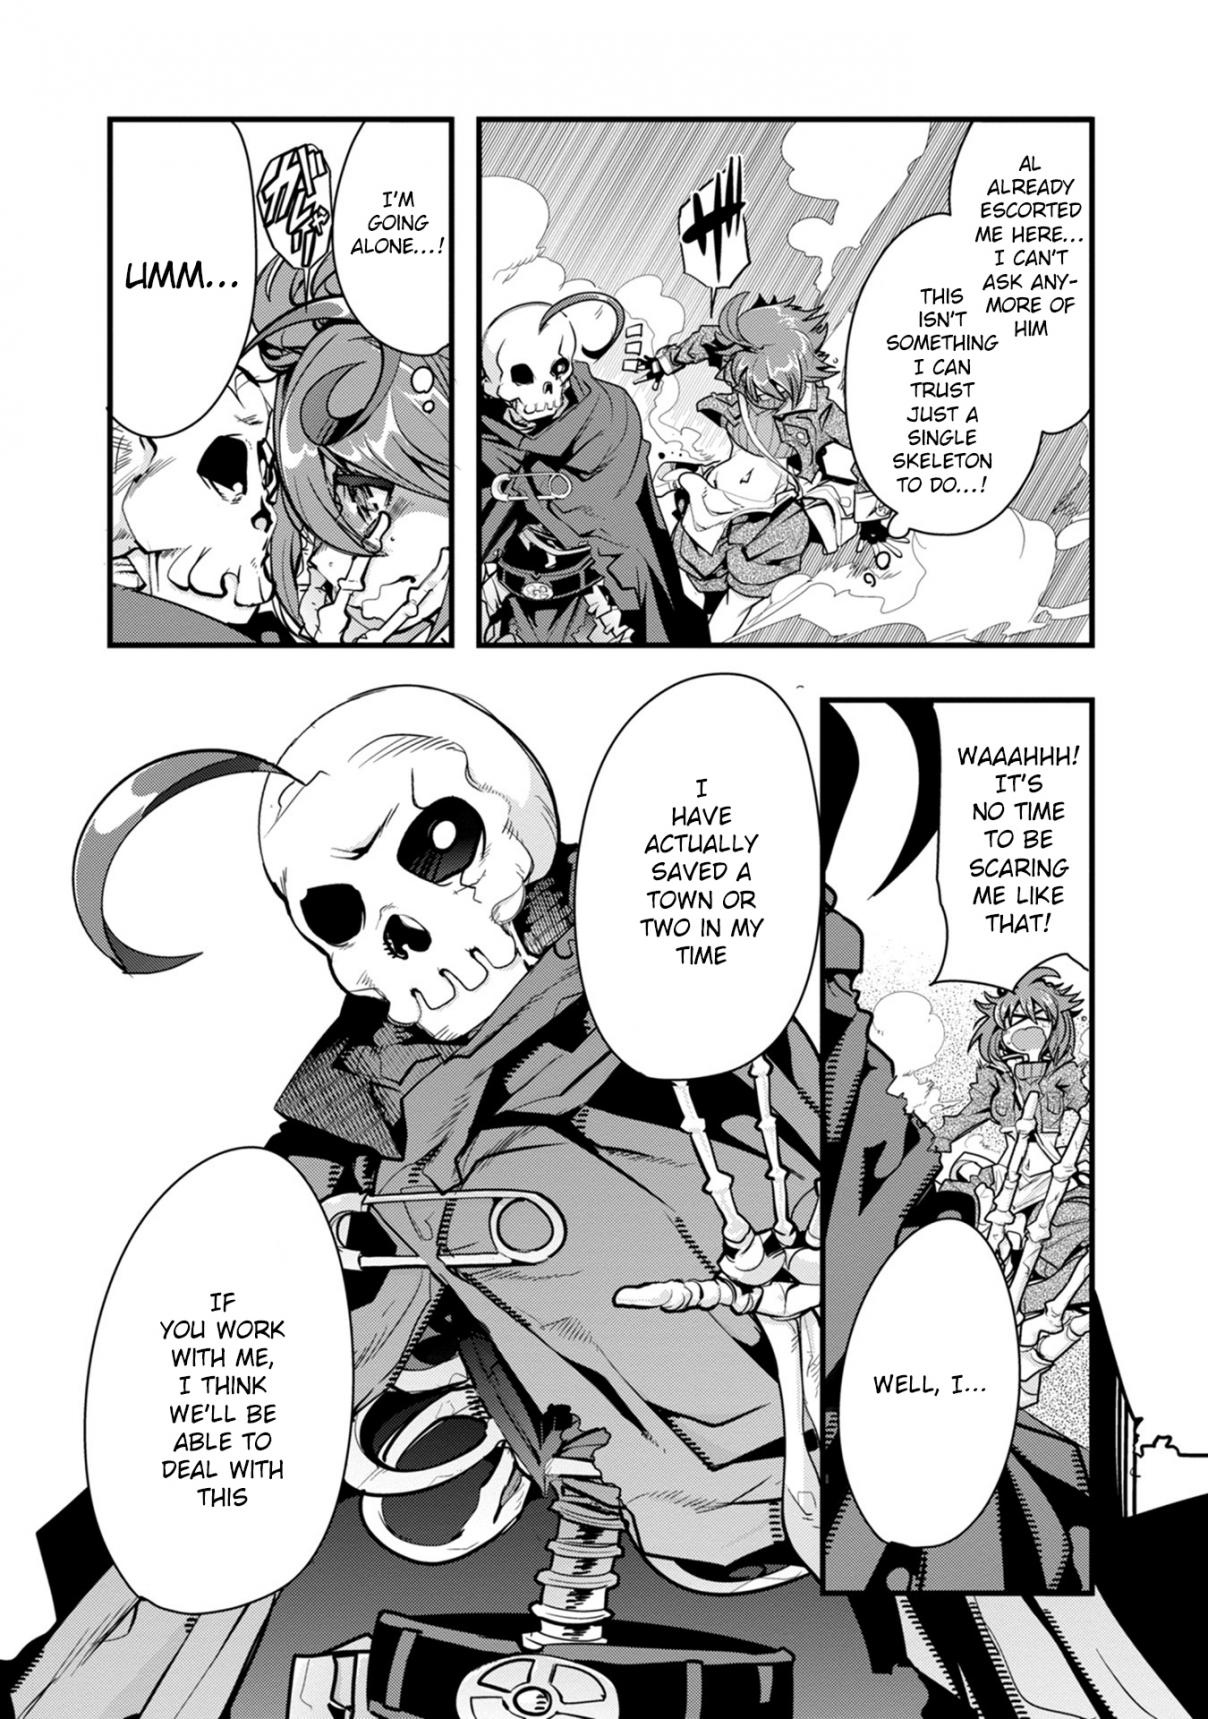 A Skeleton who was The Brave Vol. 1 Ch. 1 The new adventurer (a skeleton) fights an orc in his first town!